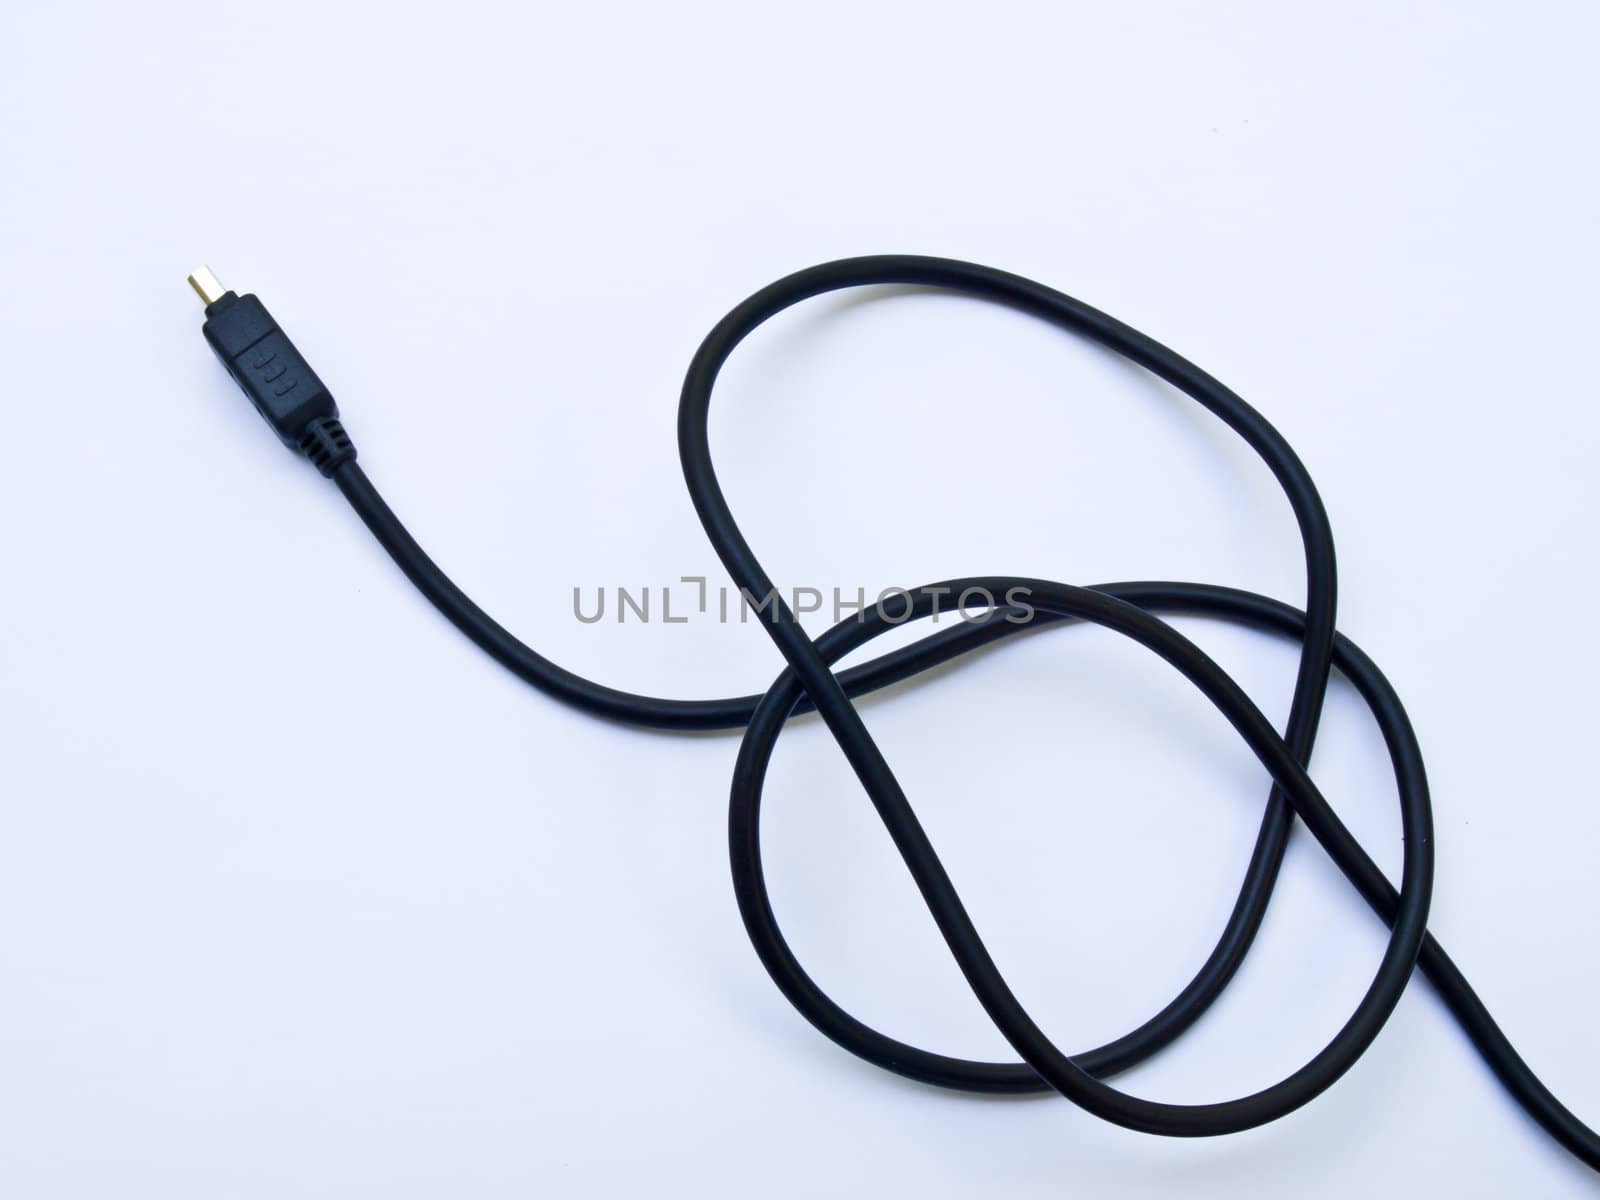 Black usb cable isolated on white background